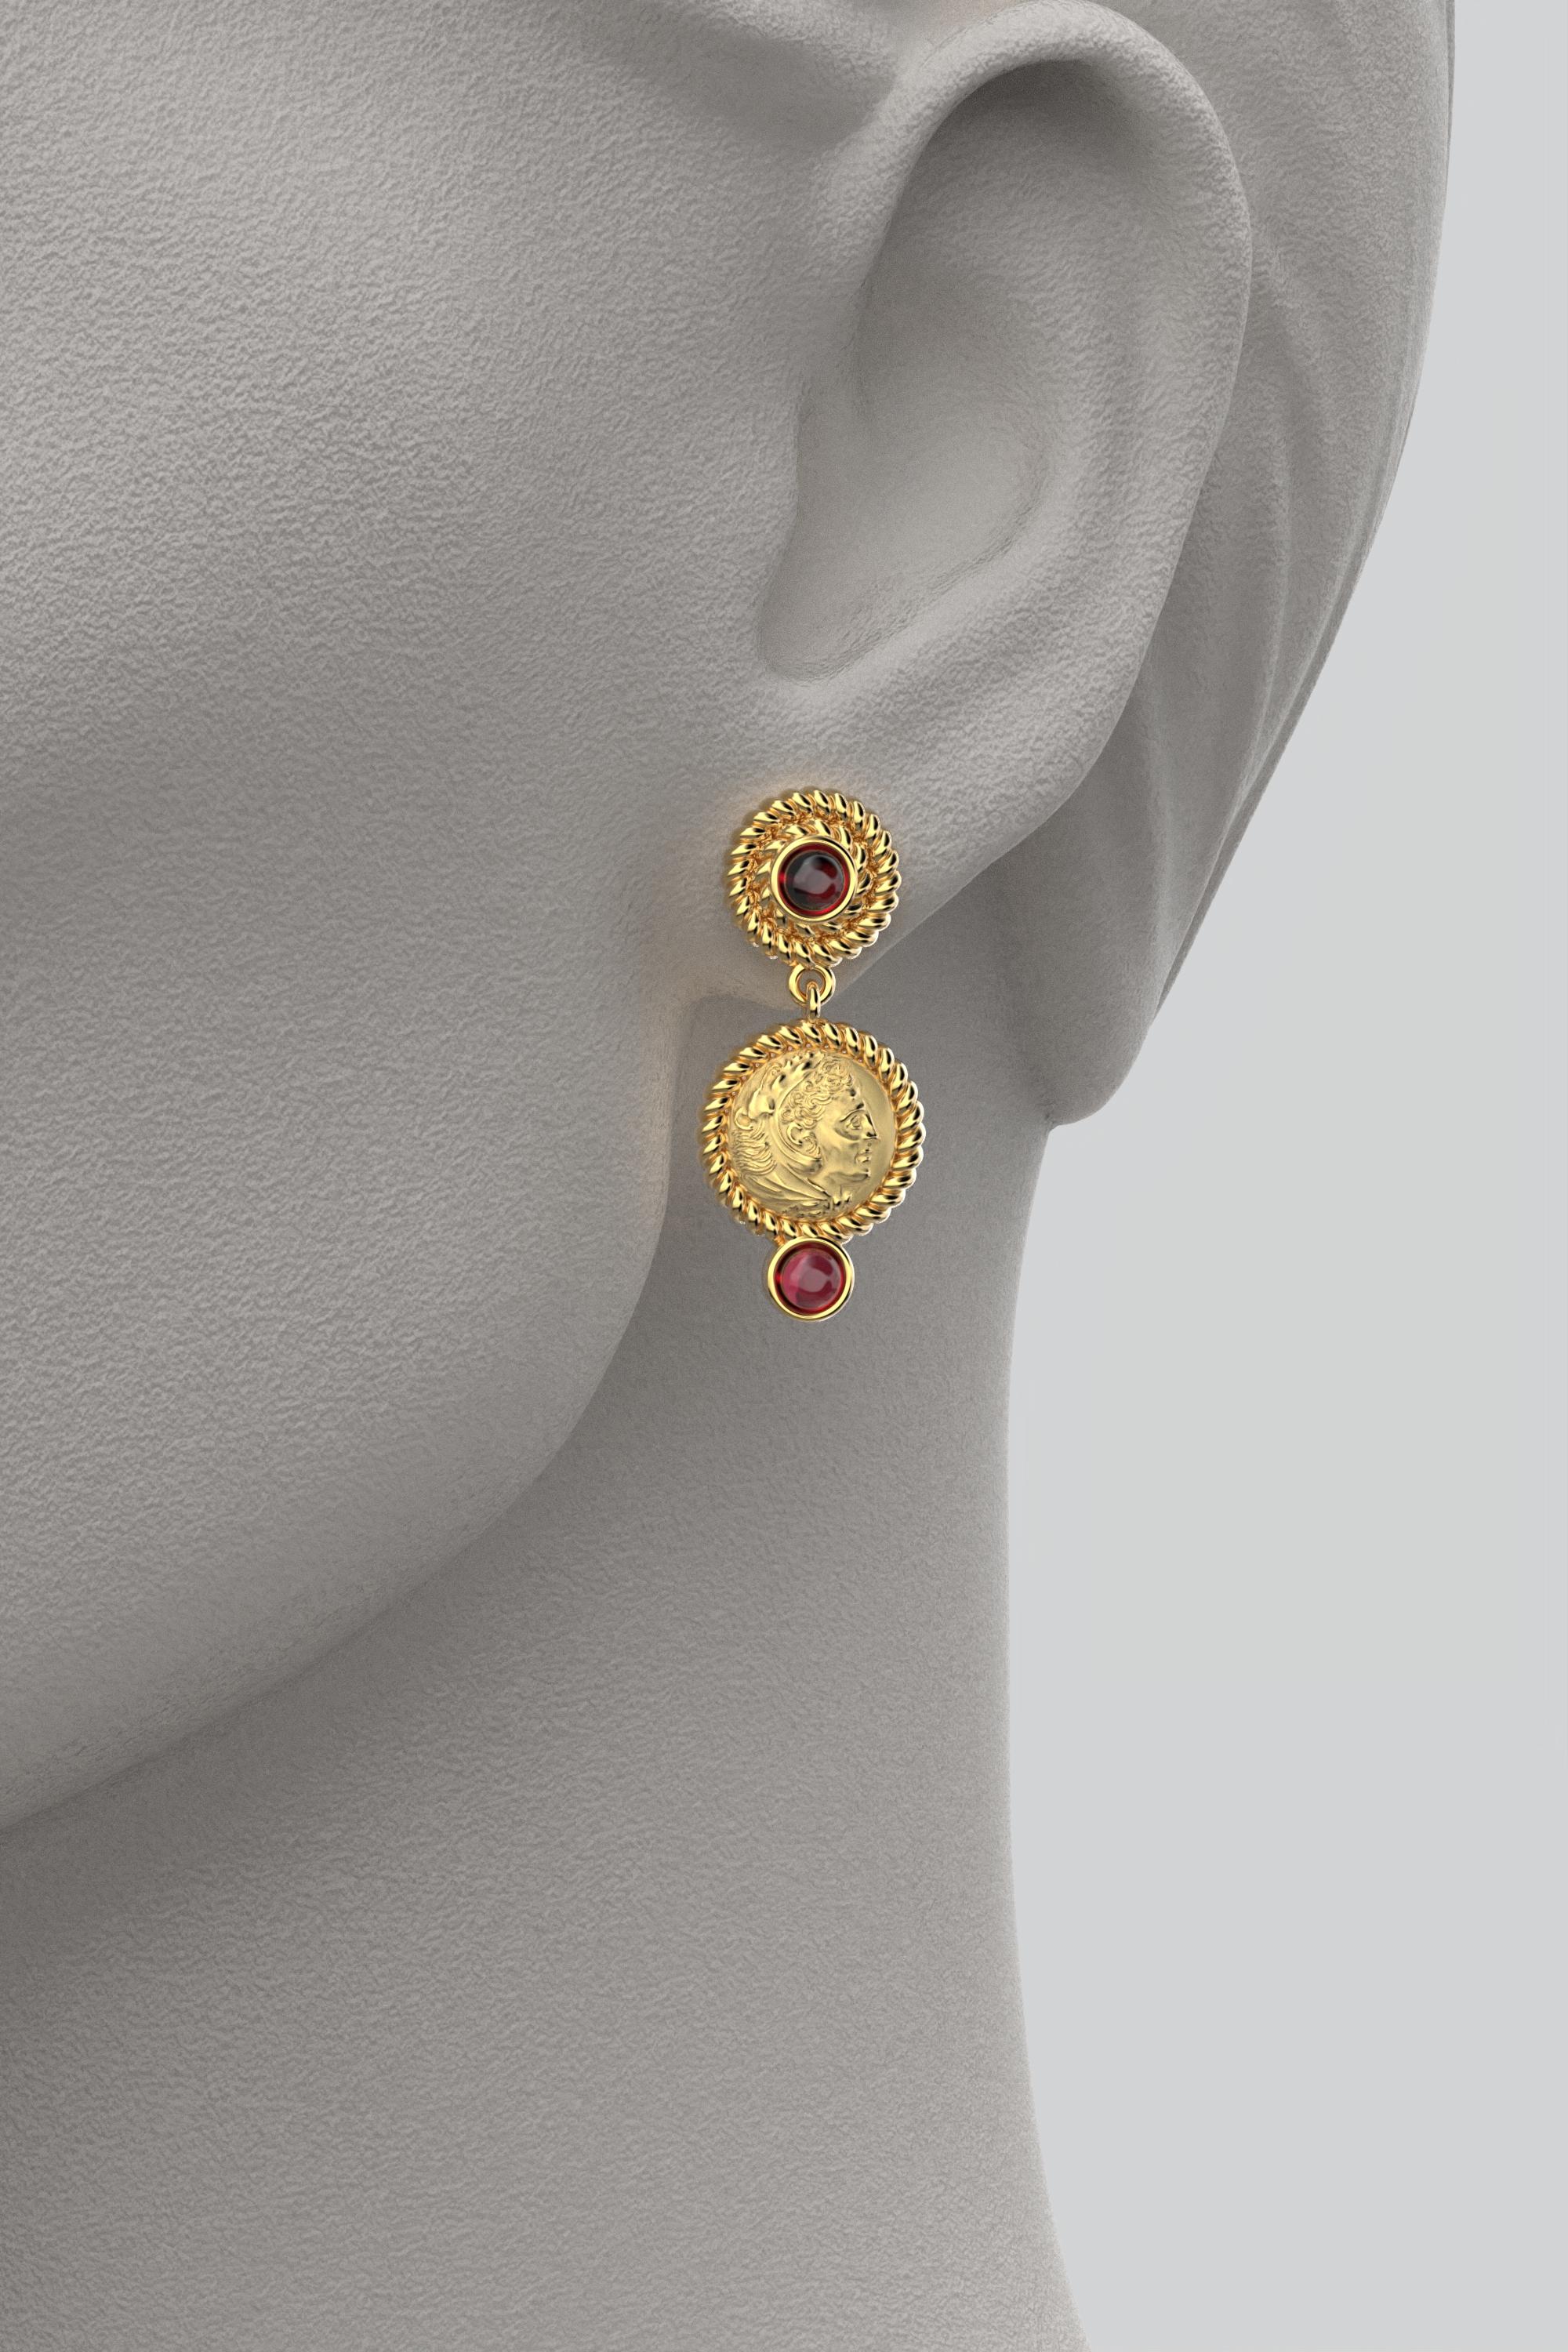 Cabochon 18k Gold Dangle Earrings in Ancient Greek Style | Italian Jewelry made in Italy For Sale